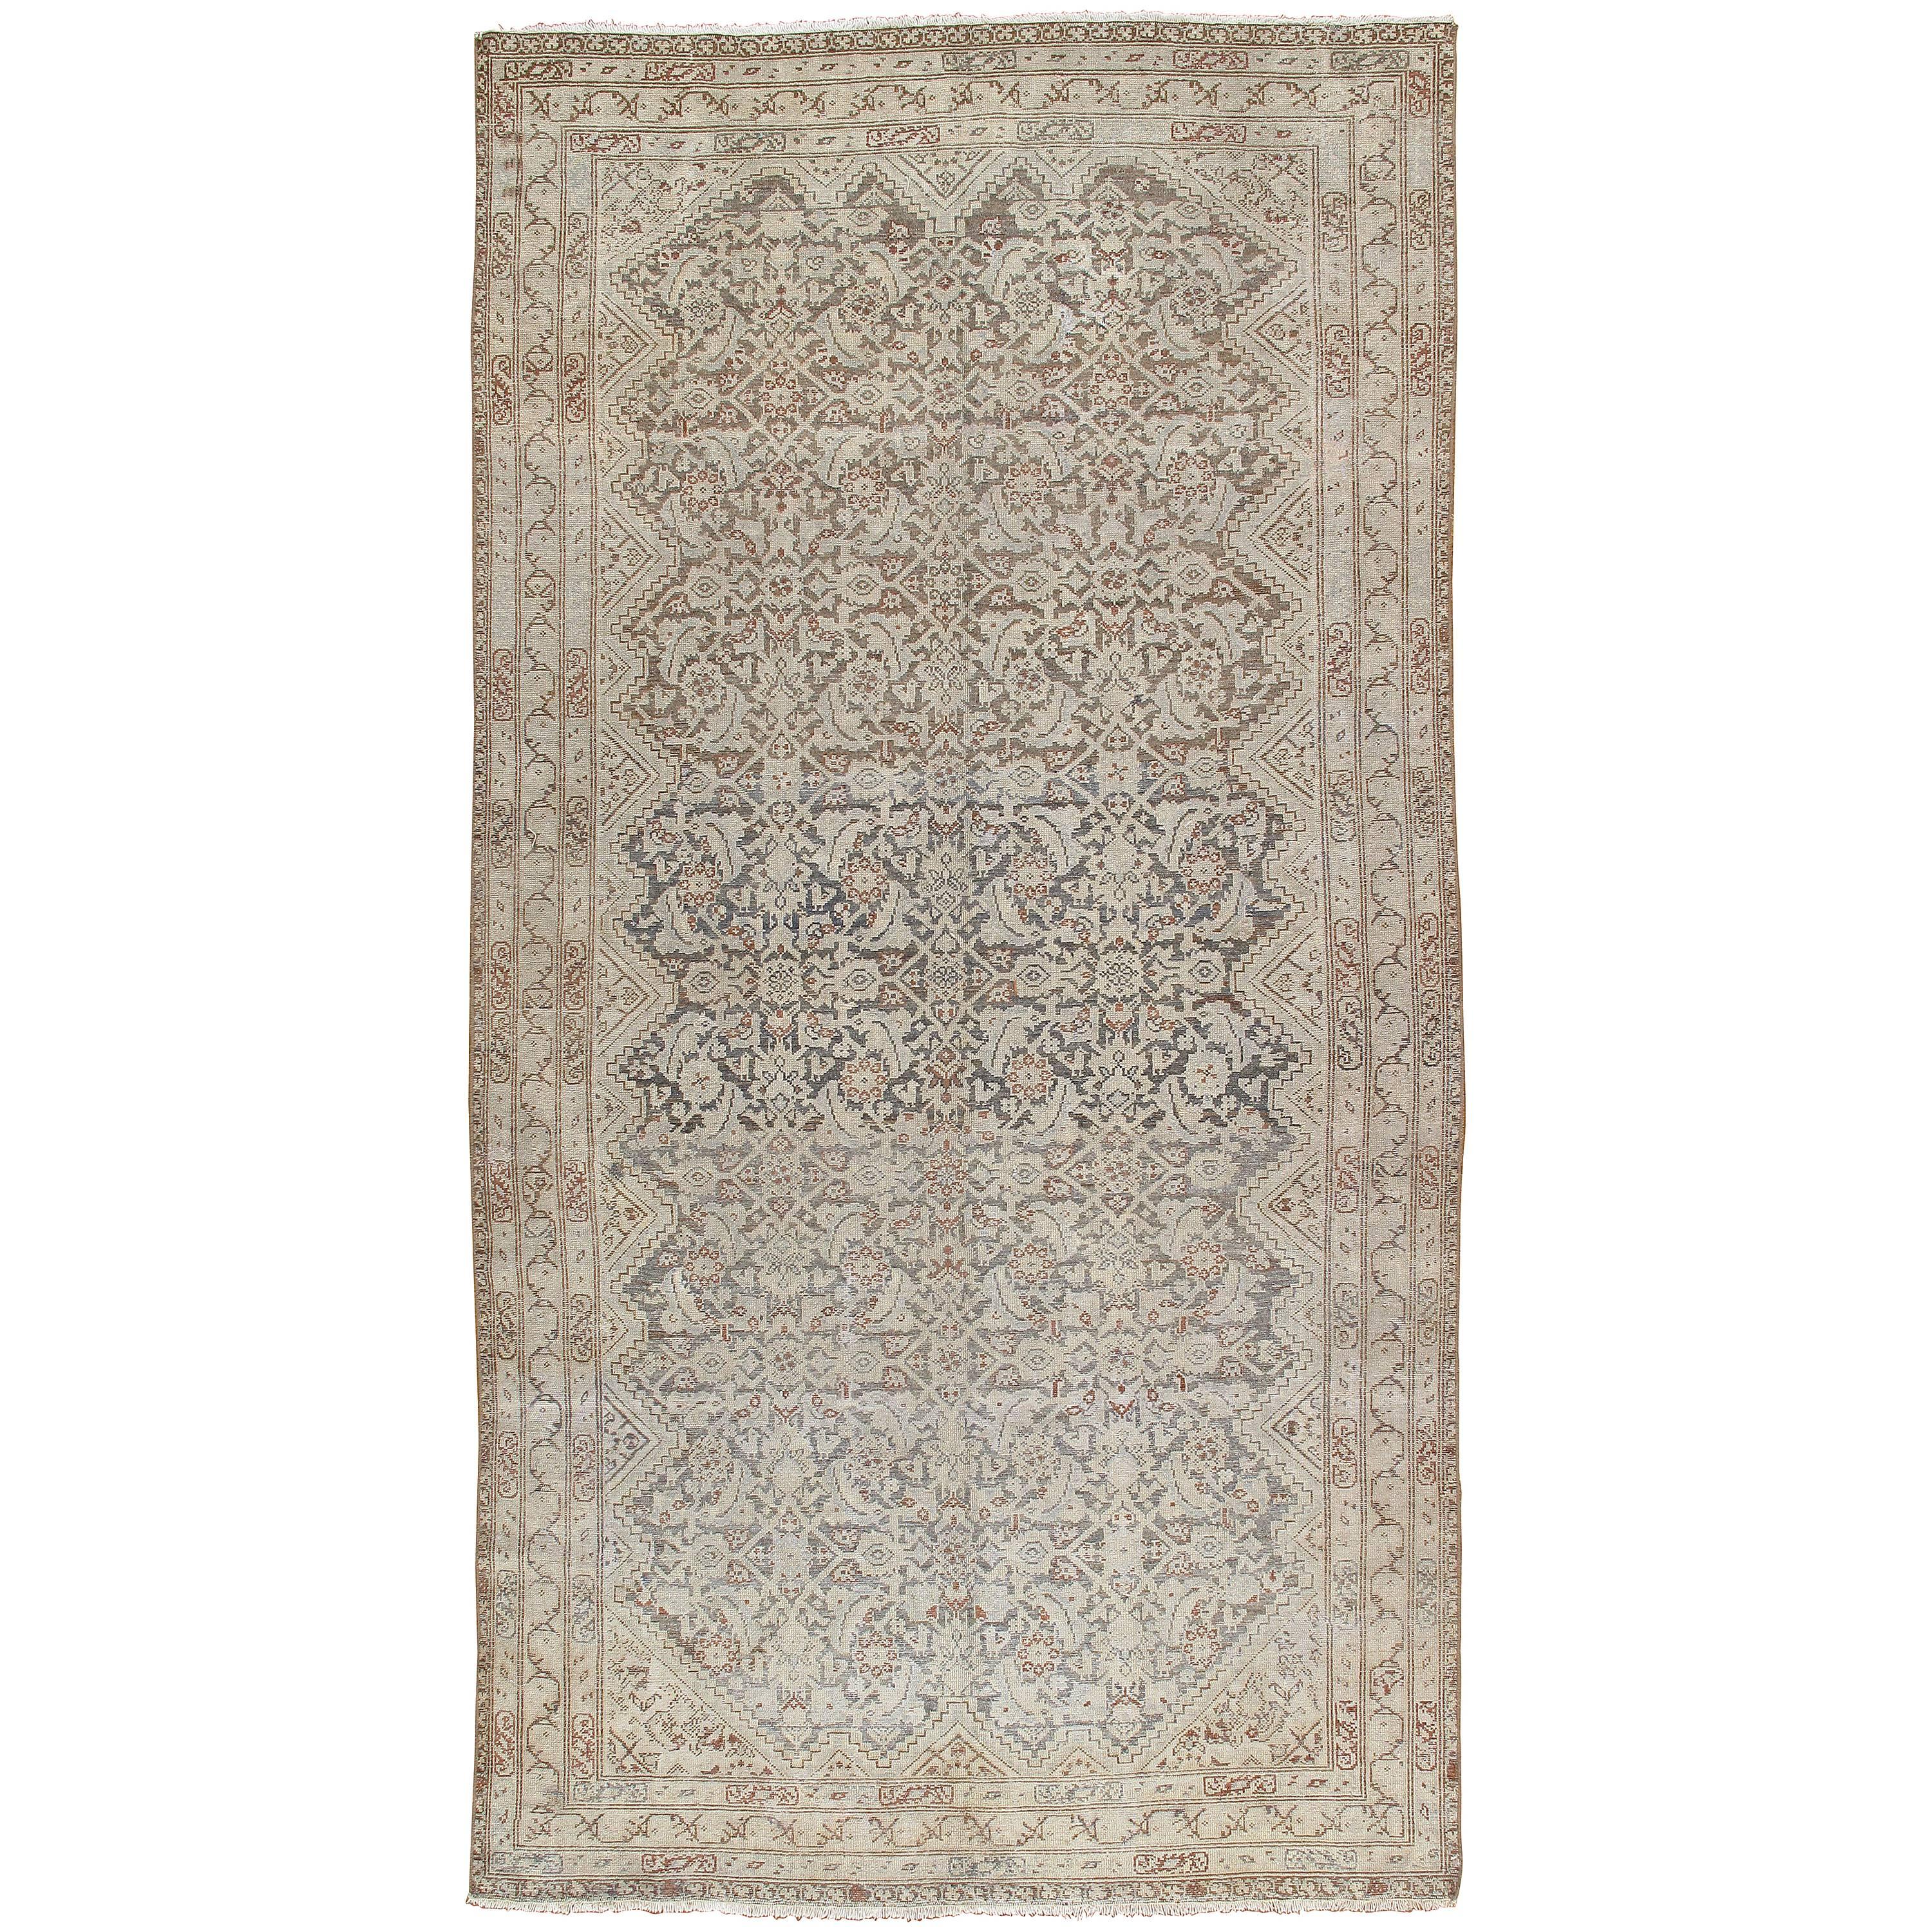 Antique Malayer Carpet, Handmade Oriental Rug, Ivory, Gray, Taupe, Fine Allover